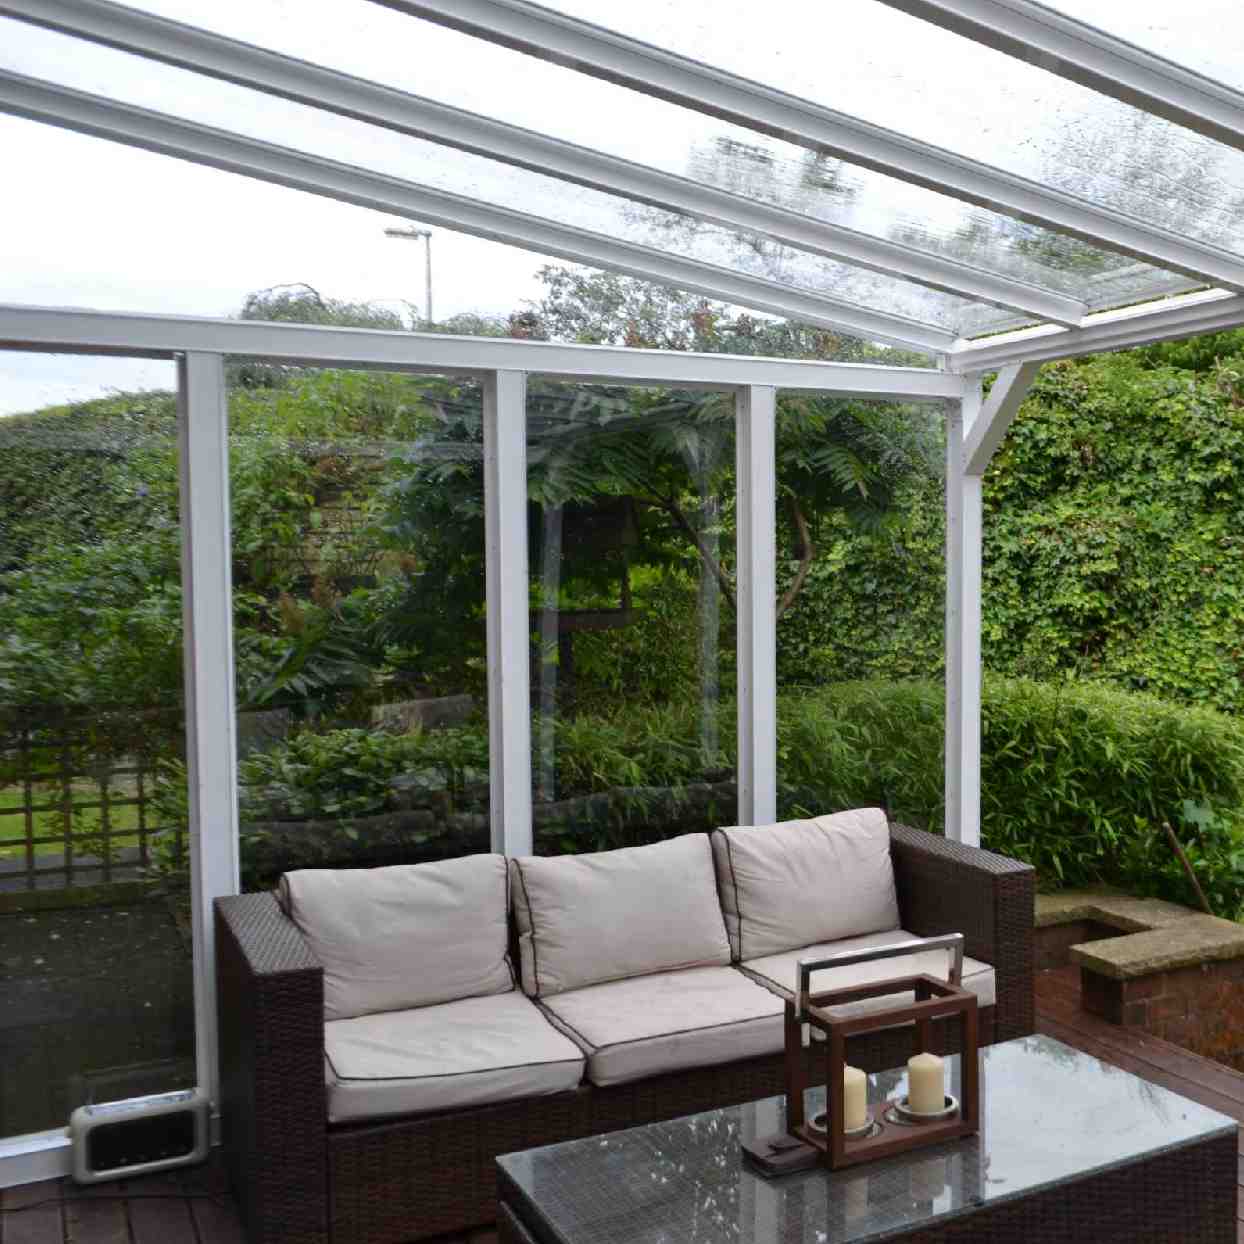 Buy Omega Verandah White with 6mm Glass Clear Plate Polycarbonate Glazing - 2.1m (W) x 2.0m (P), (2) Supporting Posts online today